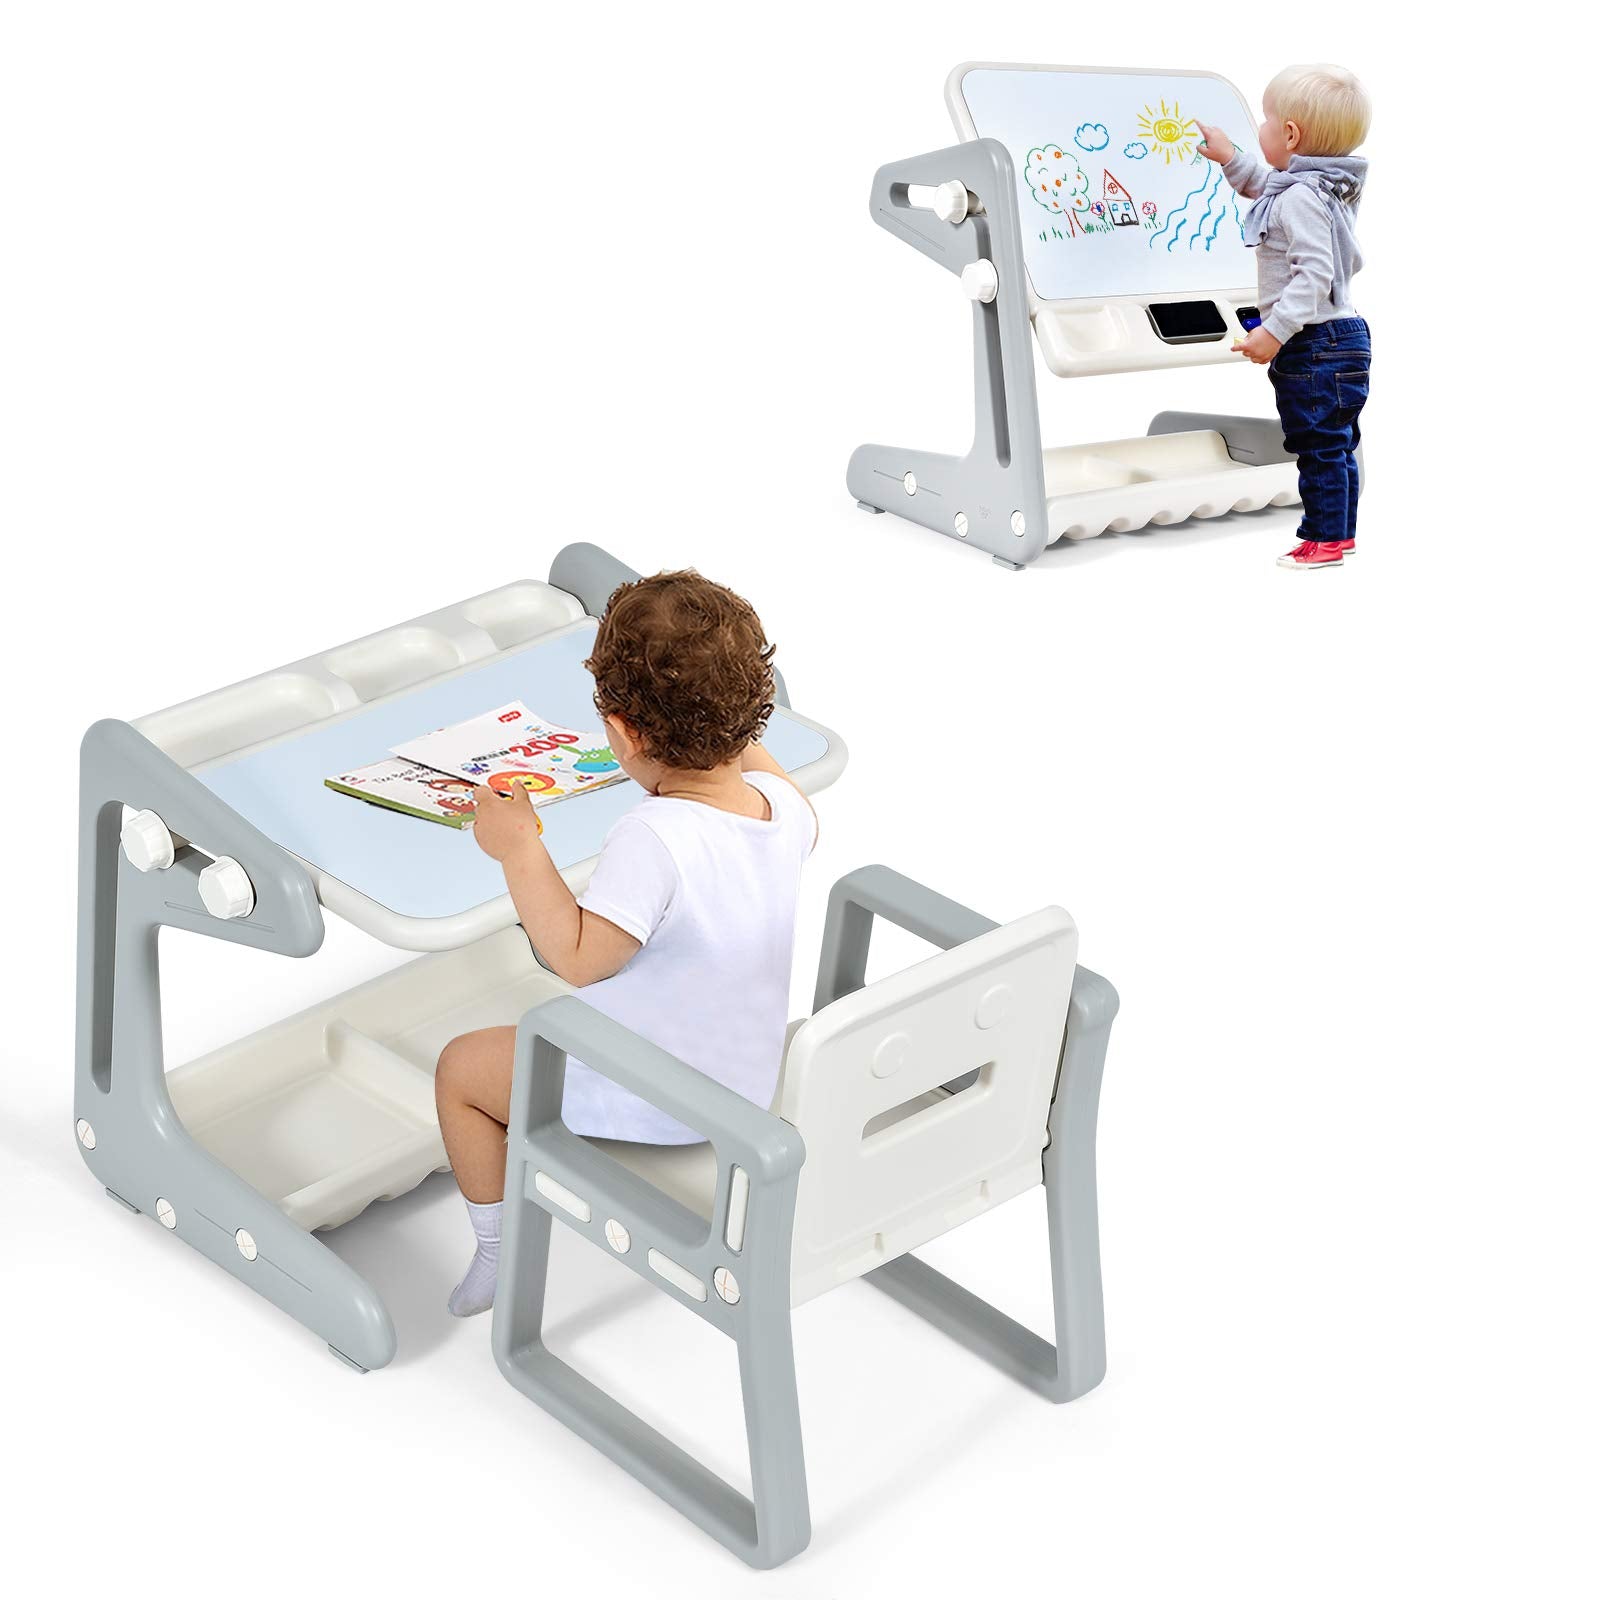 Costzon Kids Art Easel, 3 in 1 Double-Sided Storage Easel, Grey